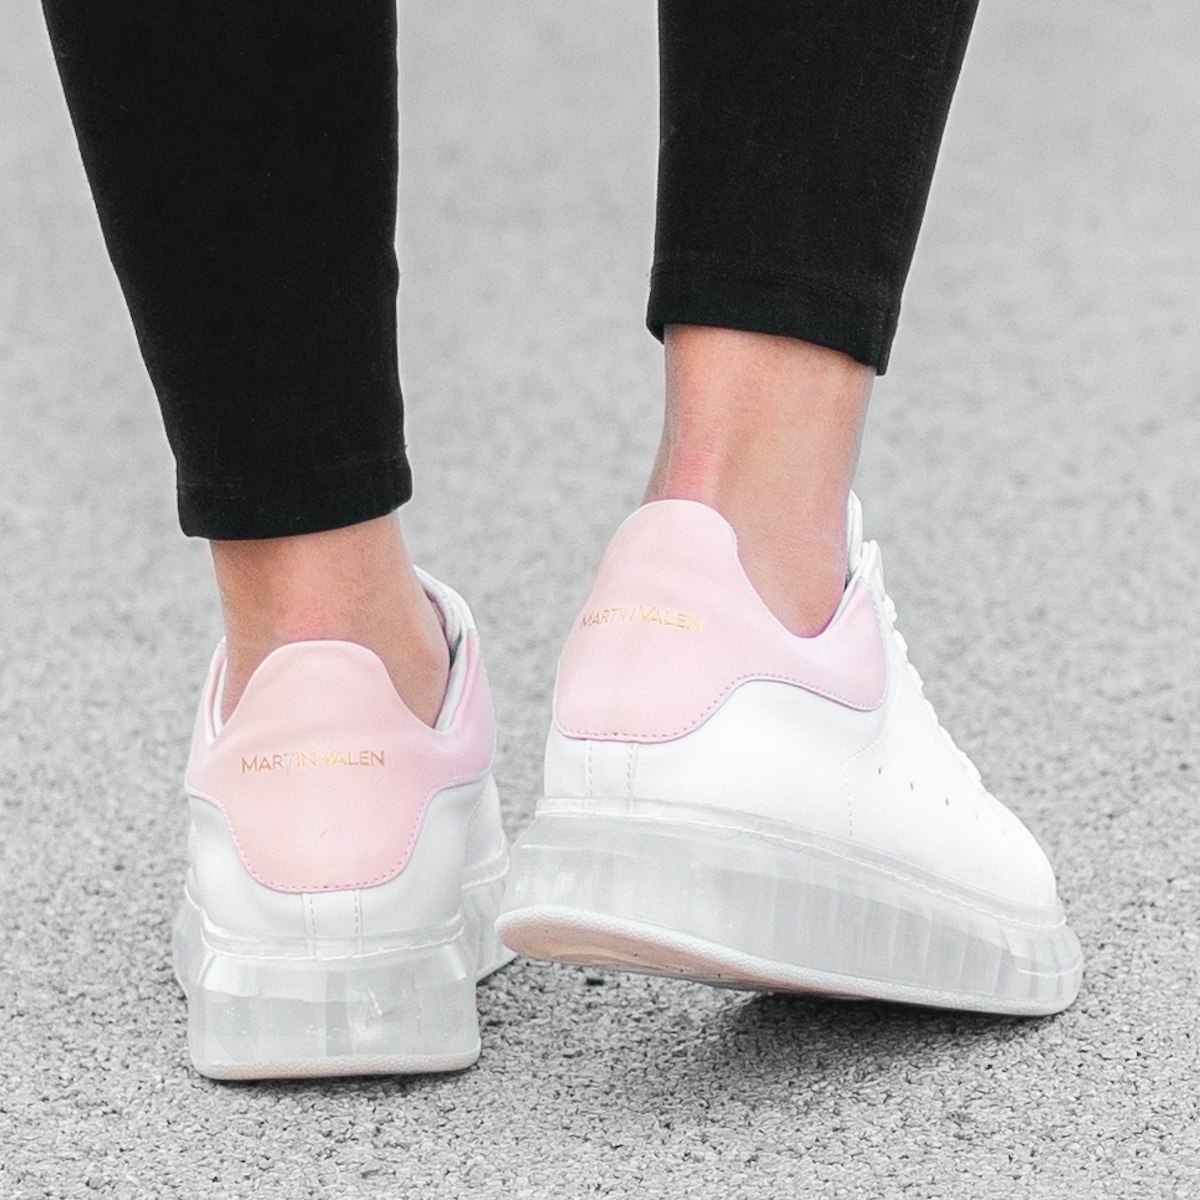 Women's O2 Transparent Hype Sole Sneakers In White-Pink - 4